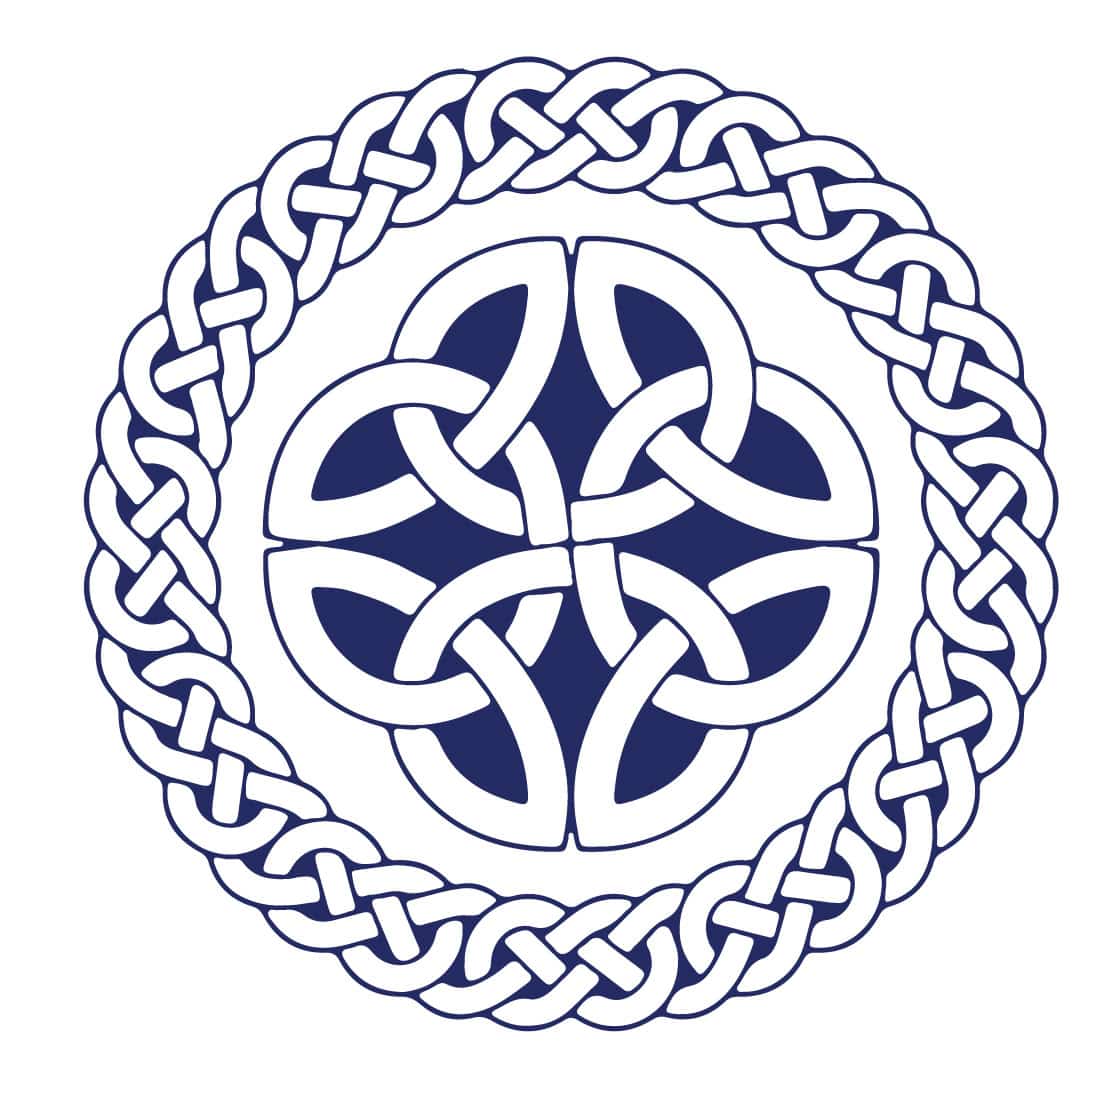 The Celtic Knot Symbol and Its Meaning